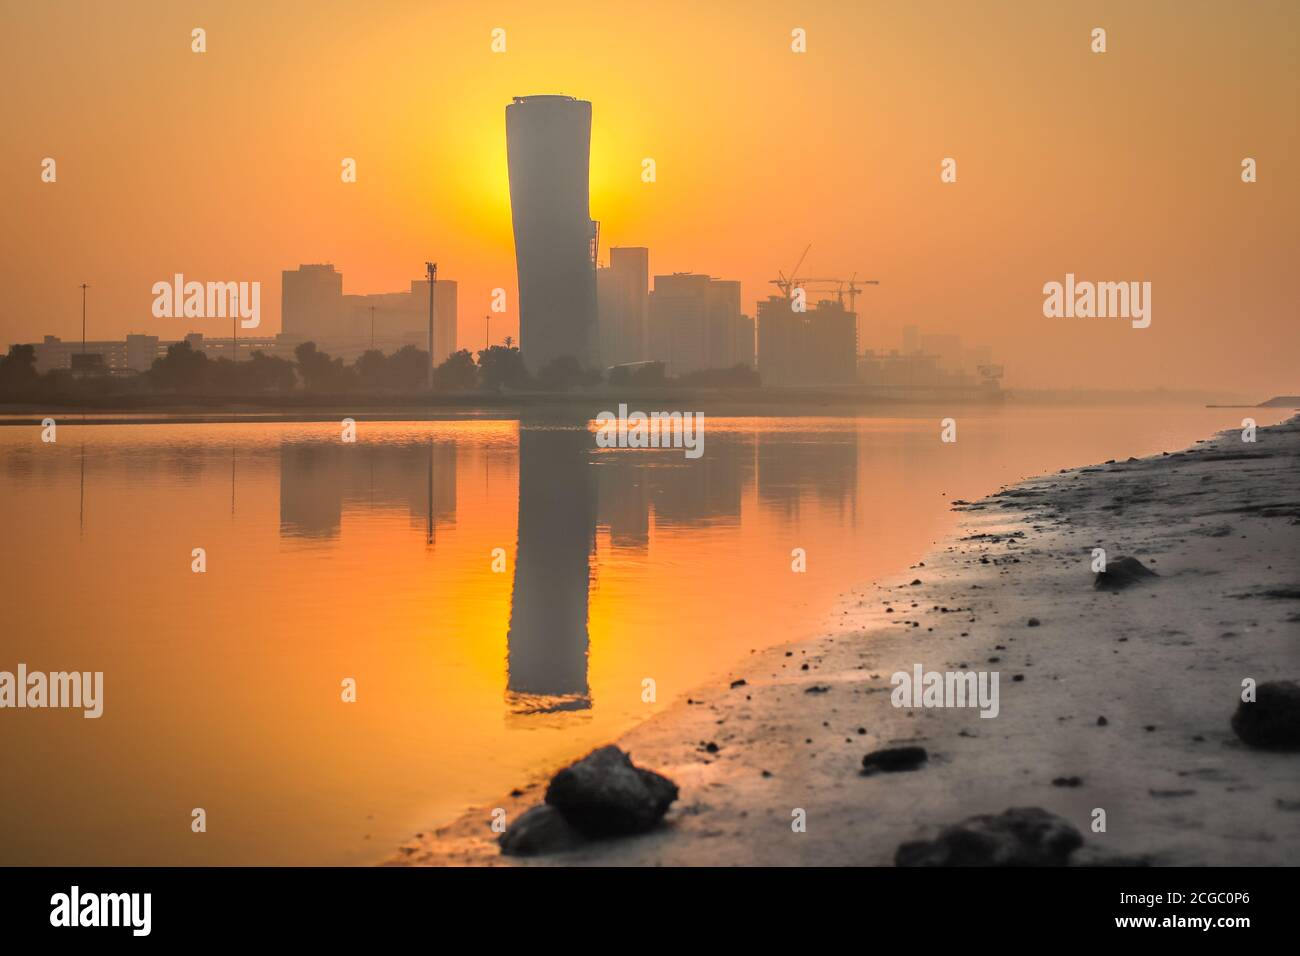 Sunrise Sky view background behind capital gate tower of Abu Dhabi, Skyscrapers in Capital city of United Arab Emirates Stock Photo